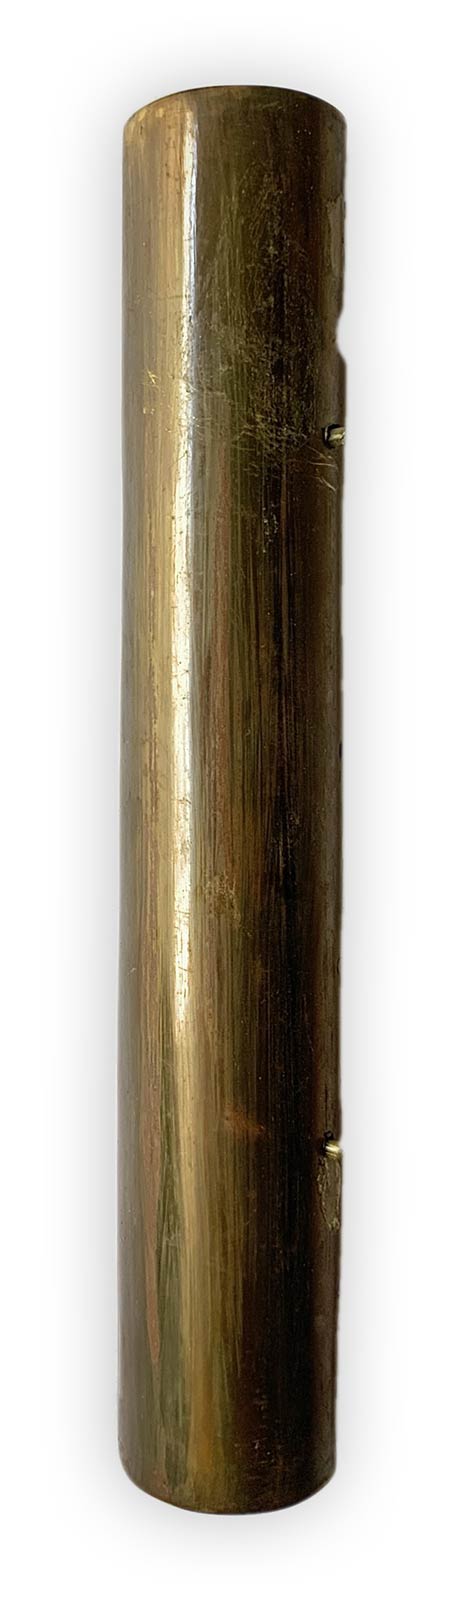 Group Ranked # 4 in brass wall lamps, Italian production. Neon lighting, otraces. 40s. - Image 2 of 8